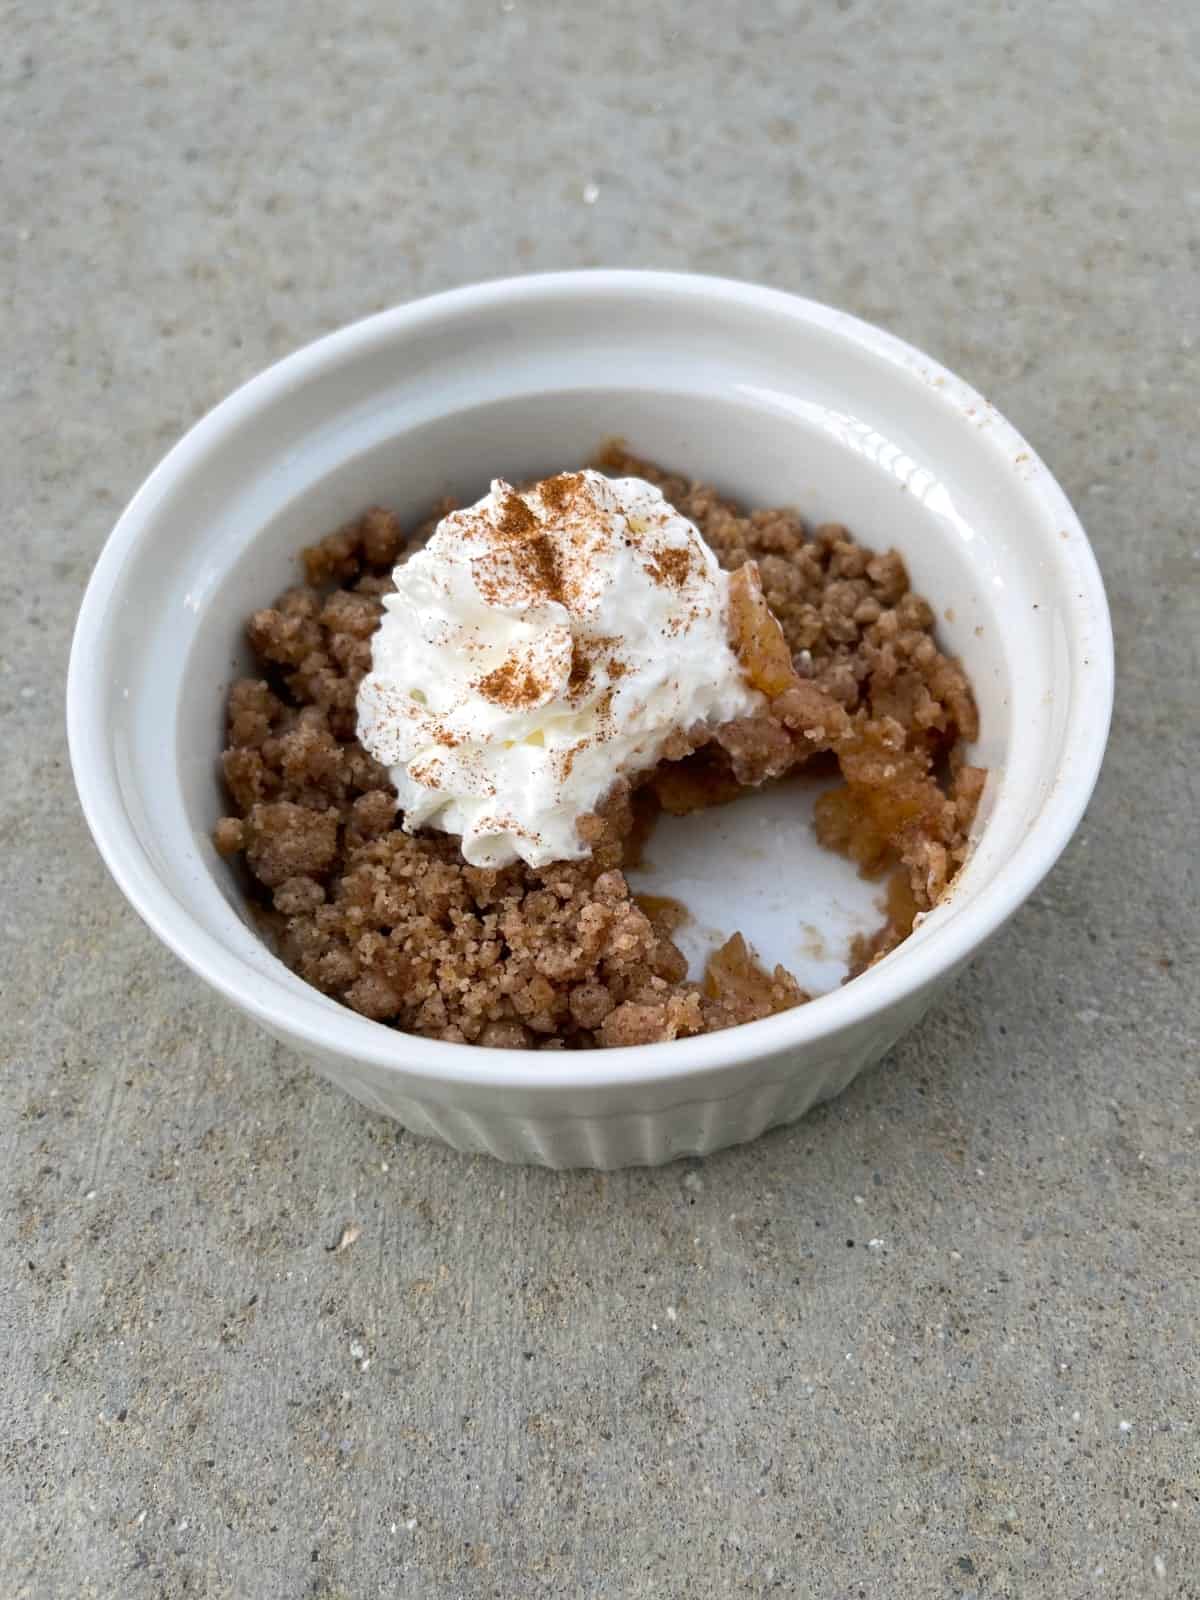 Partial microwave apple crisp dessert in white ramekin with whipped topping.